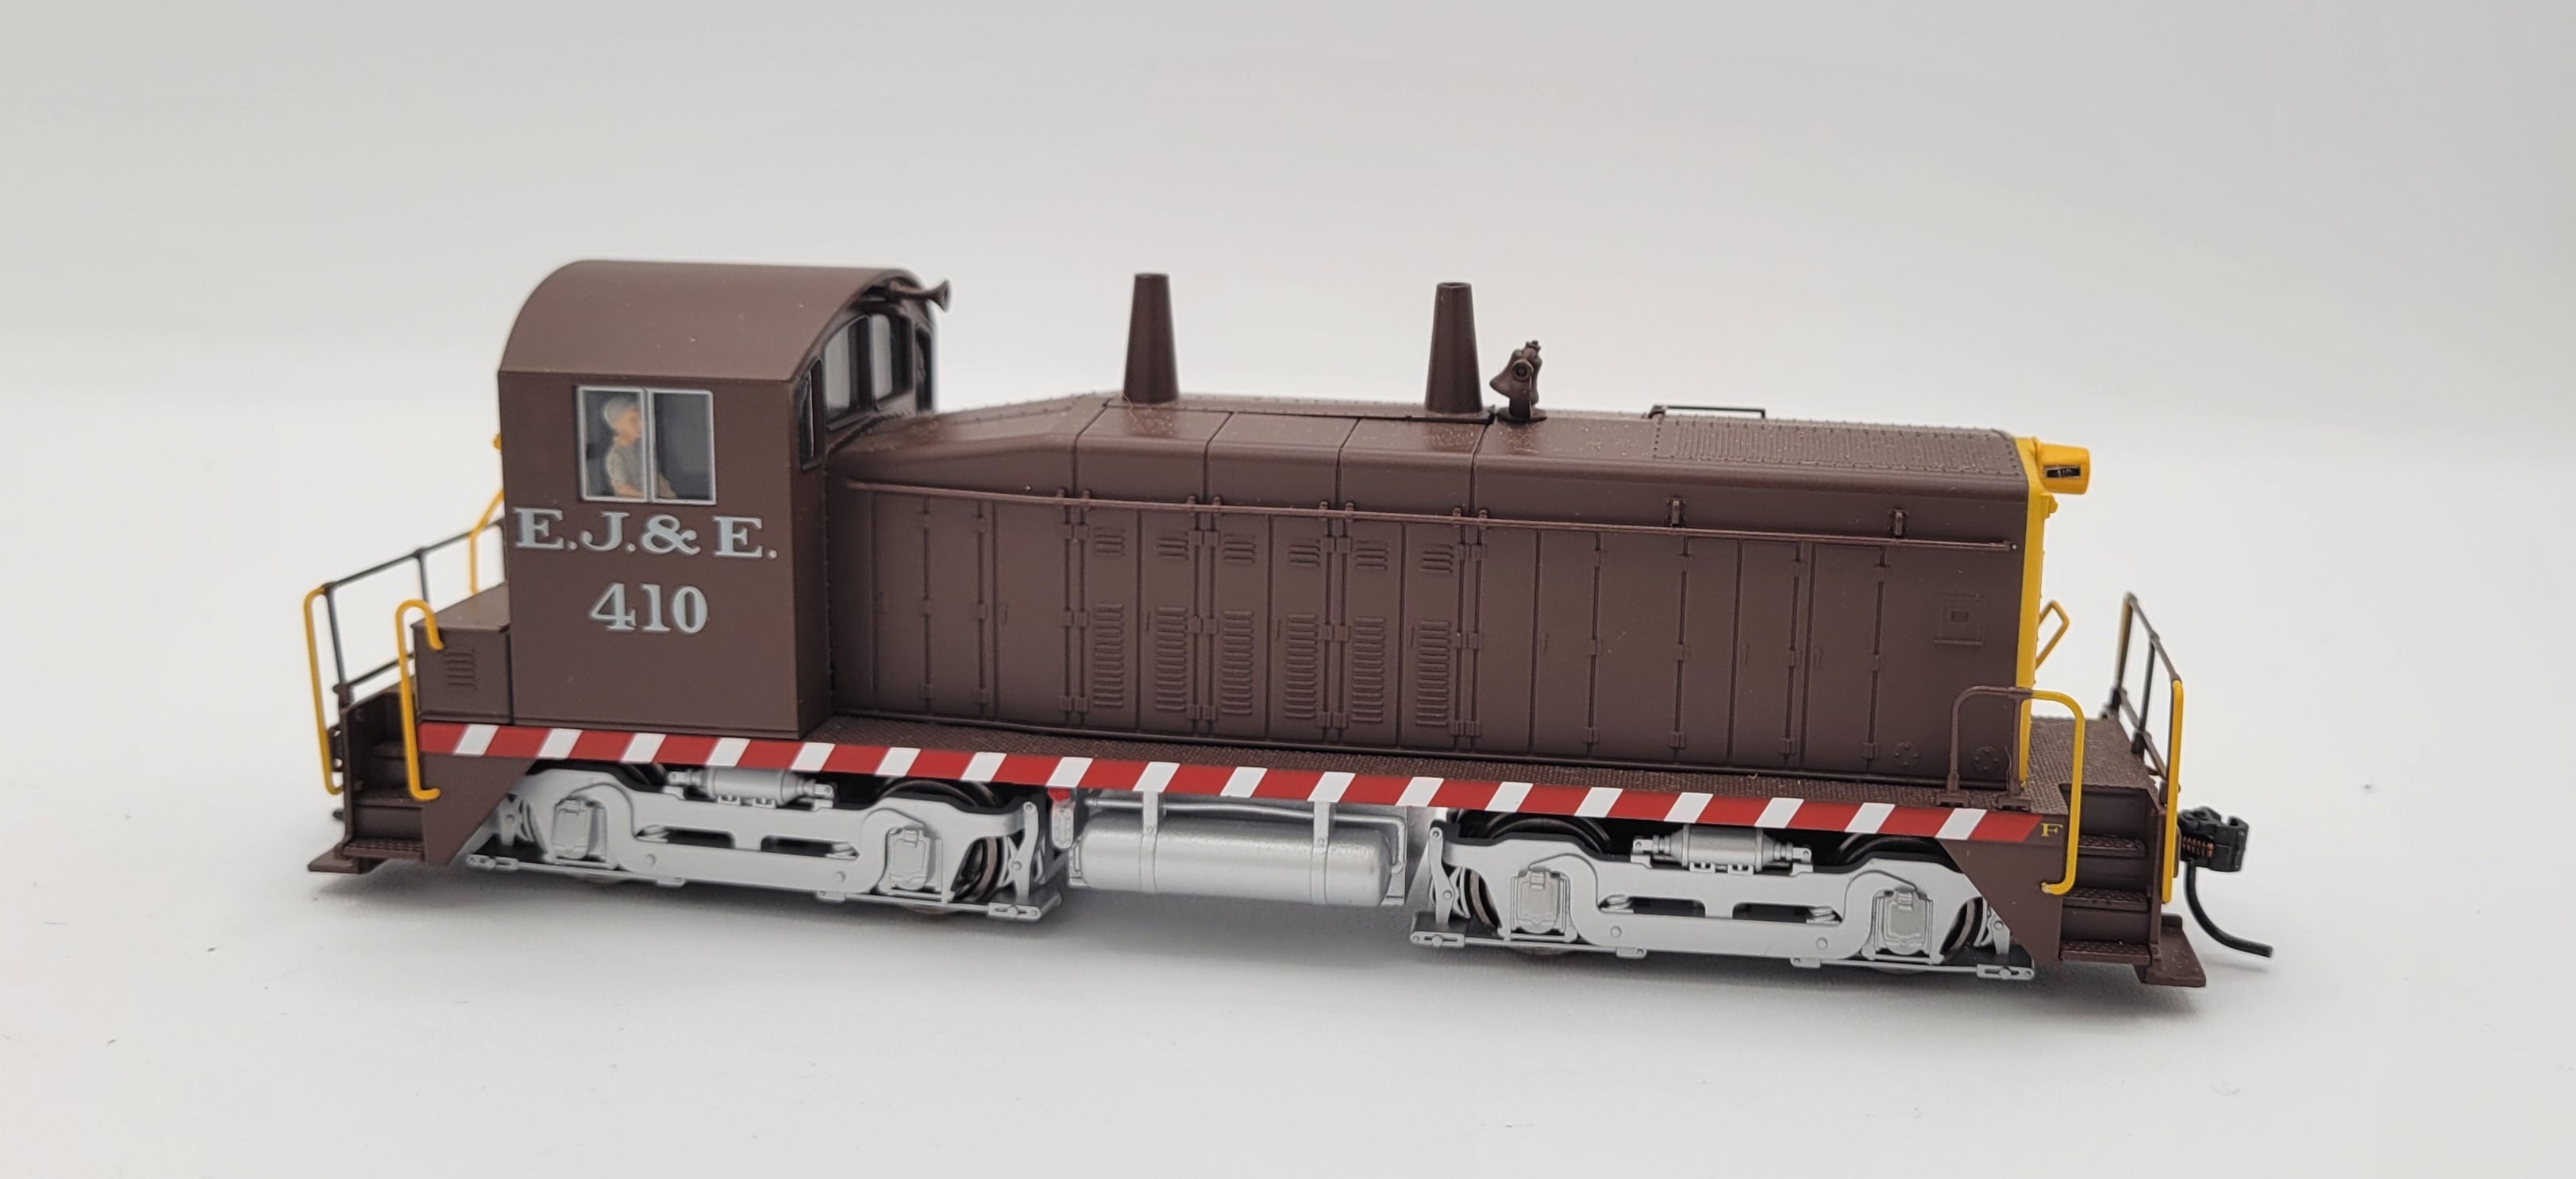 (PRE-PRODUCTION UNPOWERED) REFURBISHED R2950 EMD NW2 Switcher, EJ&E #410, Brown & Yellow, Unpowered, HO